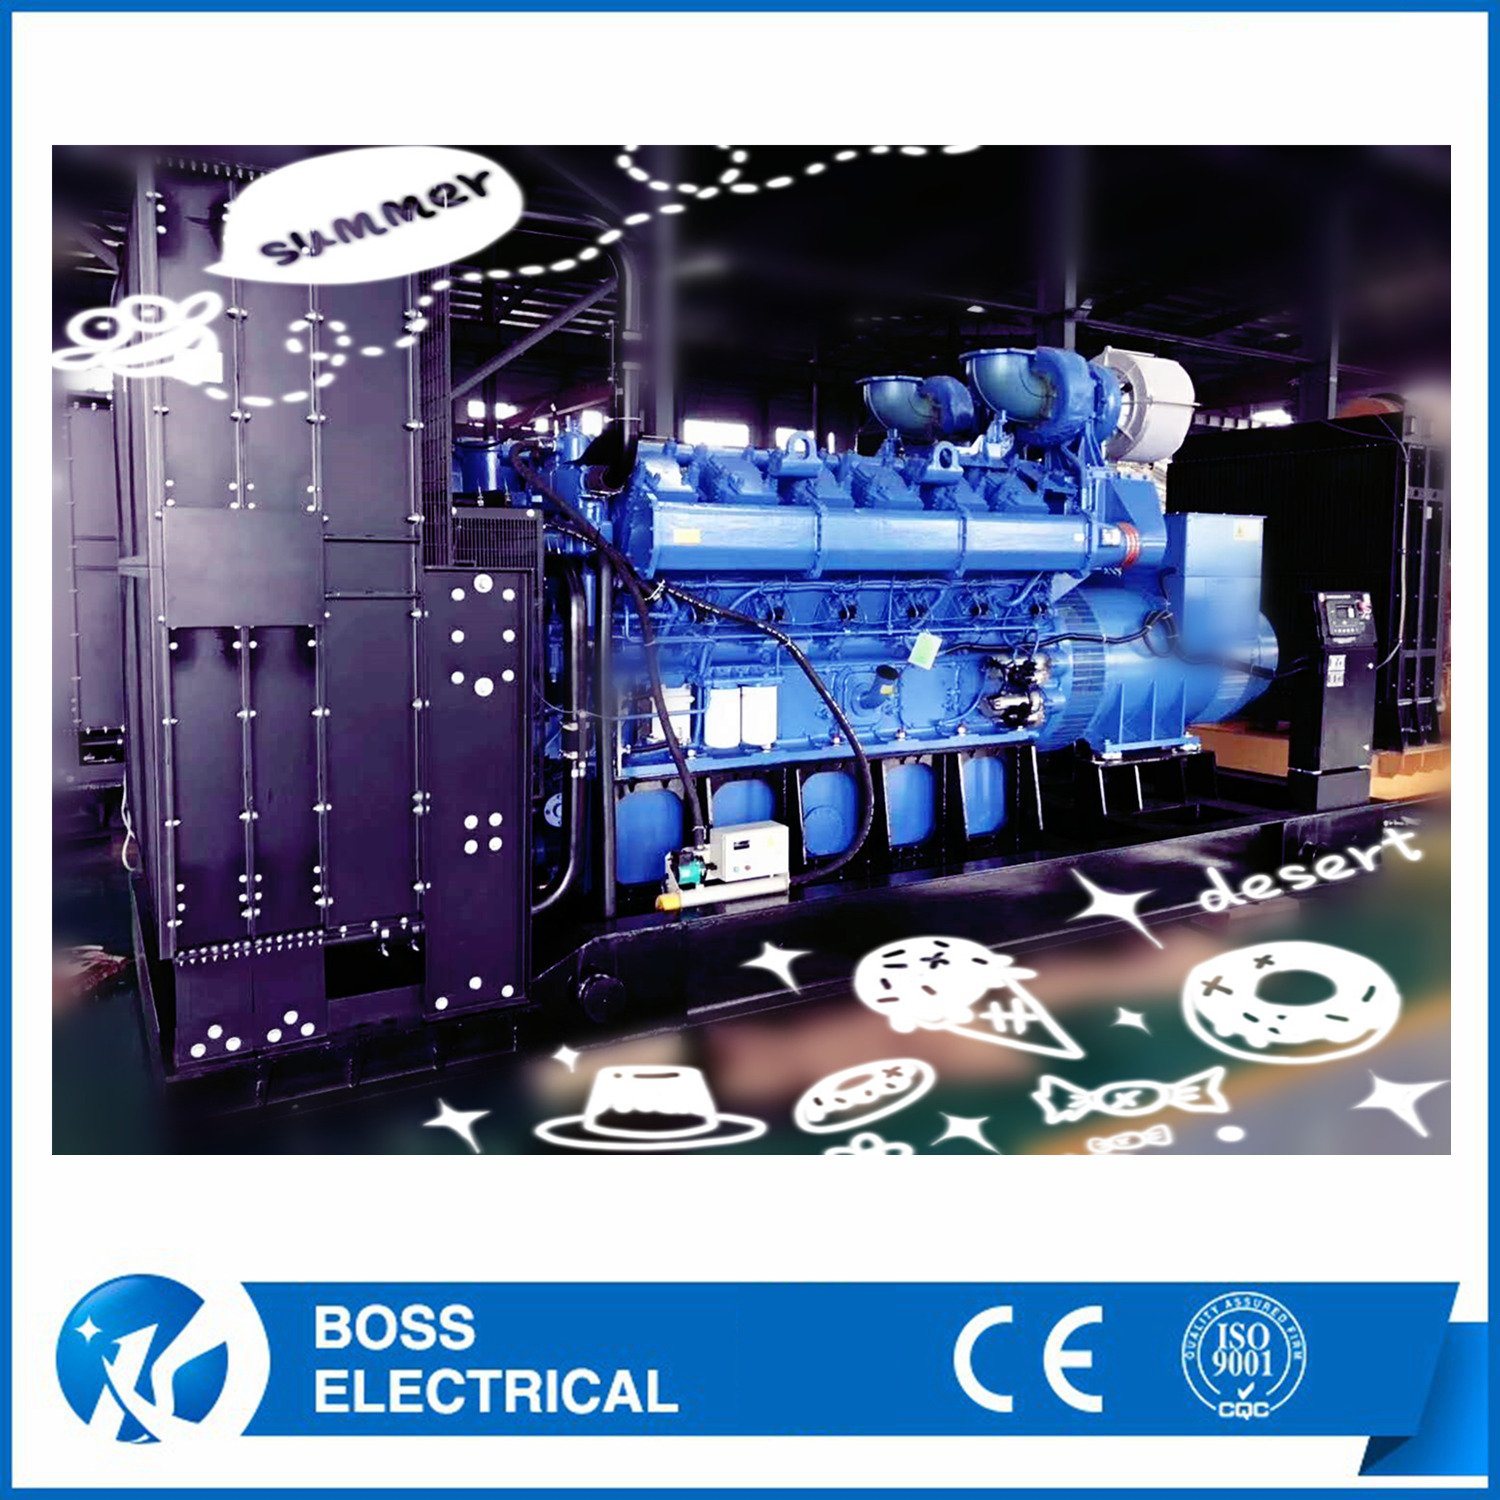 Yuchai Powered Electric 200kVA 160kw Generator Diesel with ATS